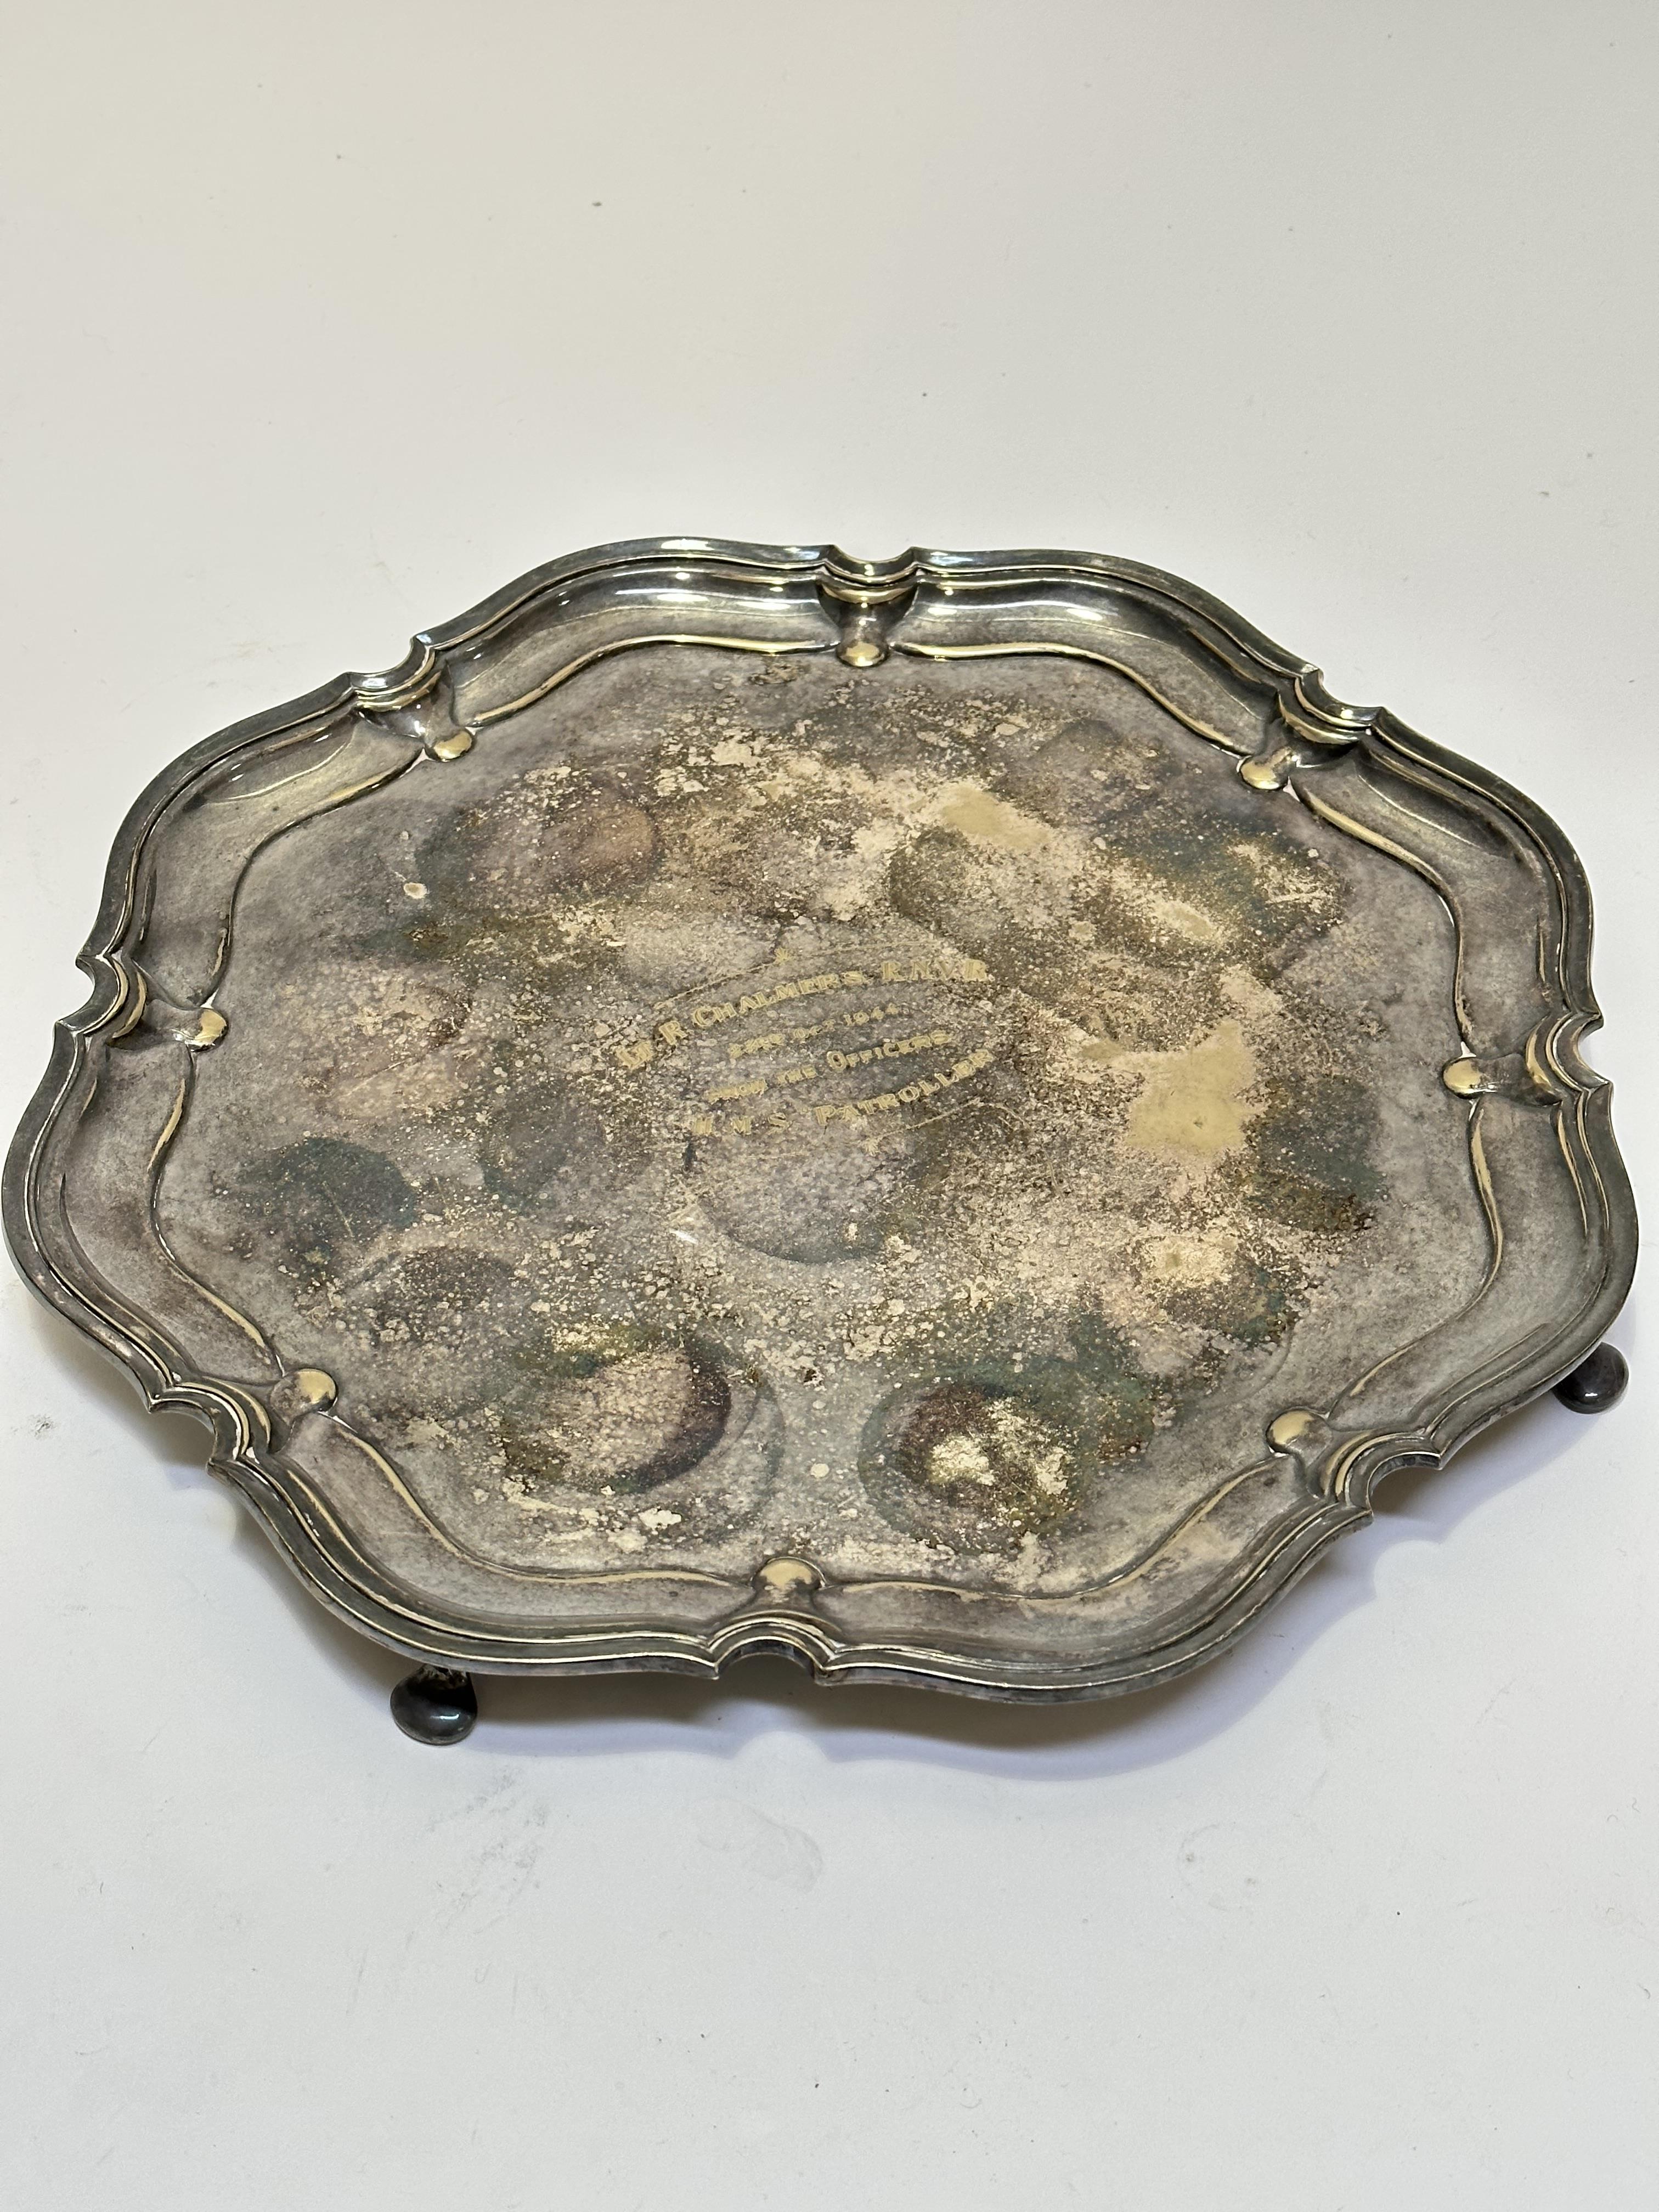 An Epns scalloped presentation tray to Lieutenant Chalmers VR, 23rd October 1944, From the